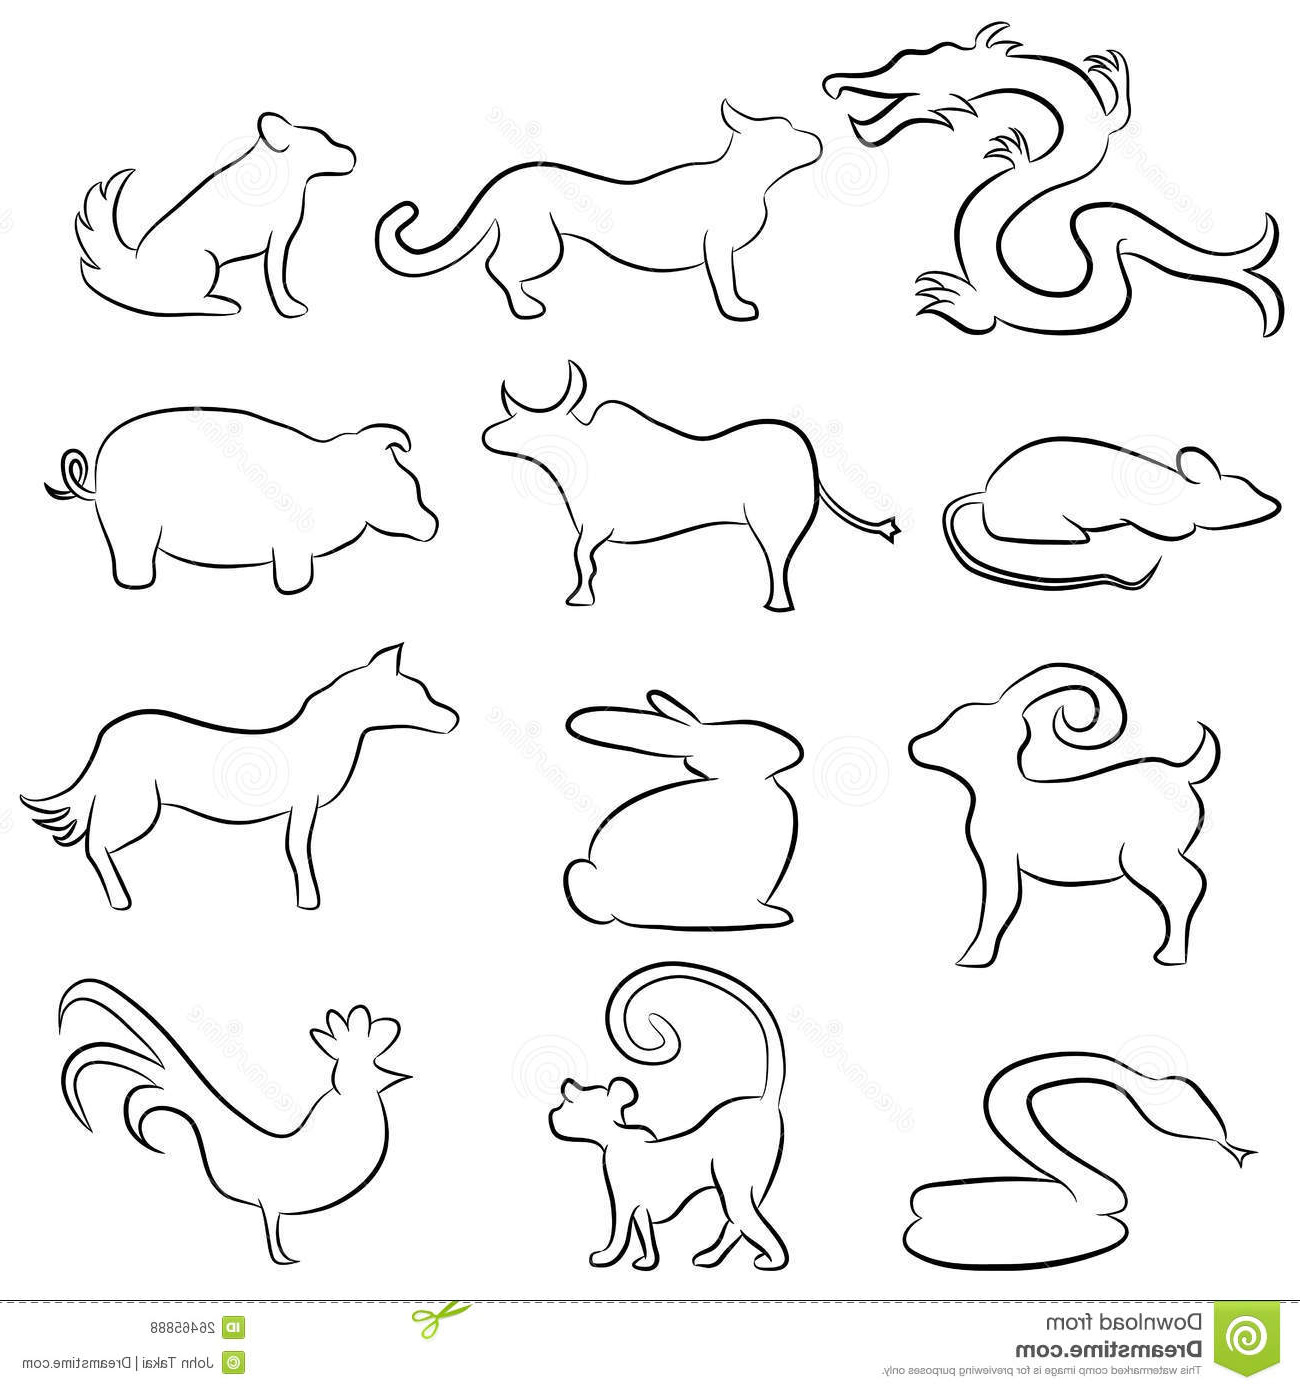 royalty free stock photos chinese astrology animal line drawings image